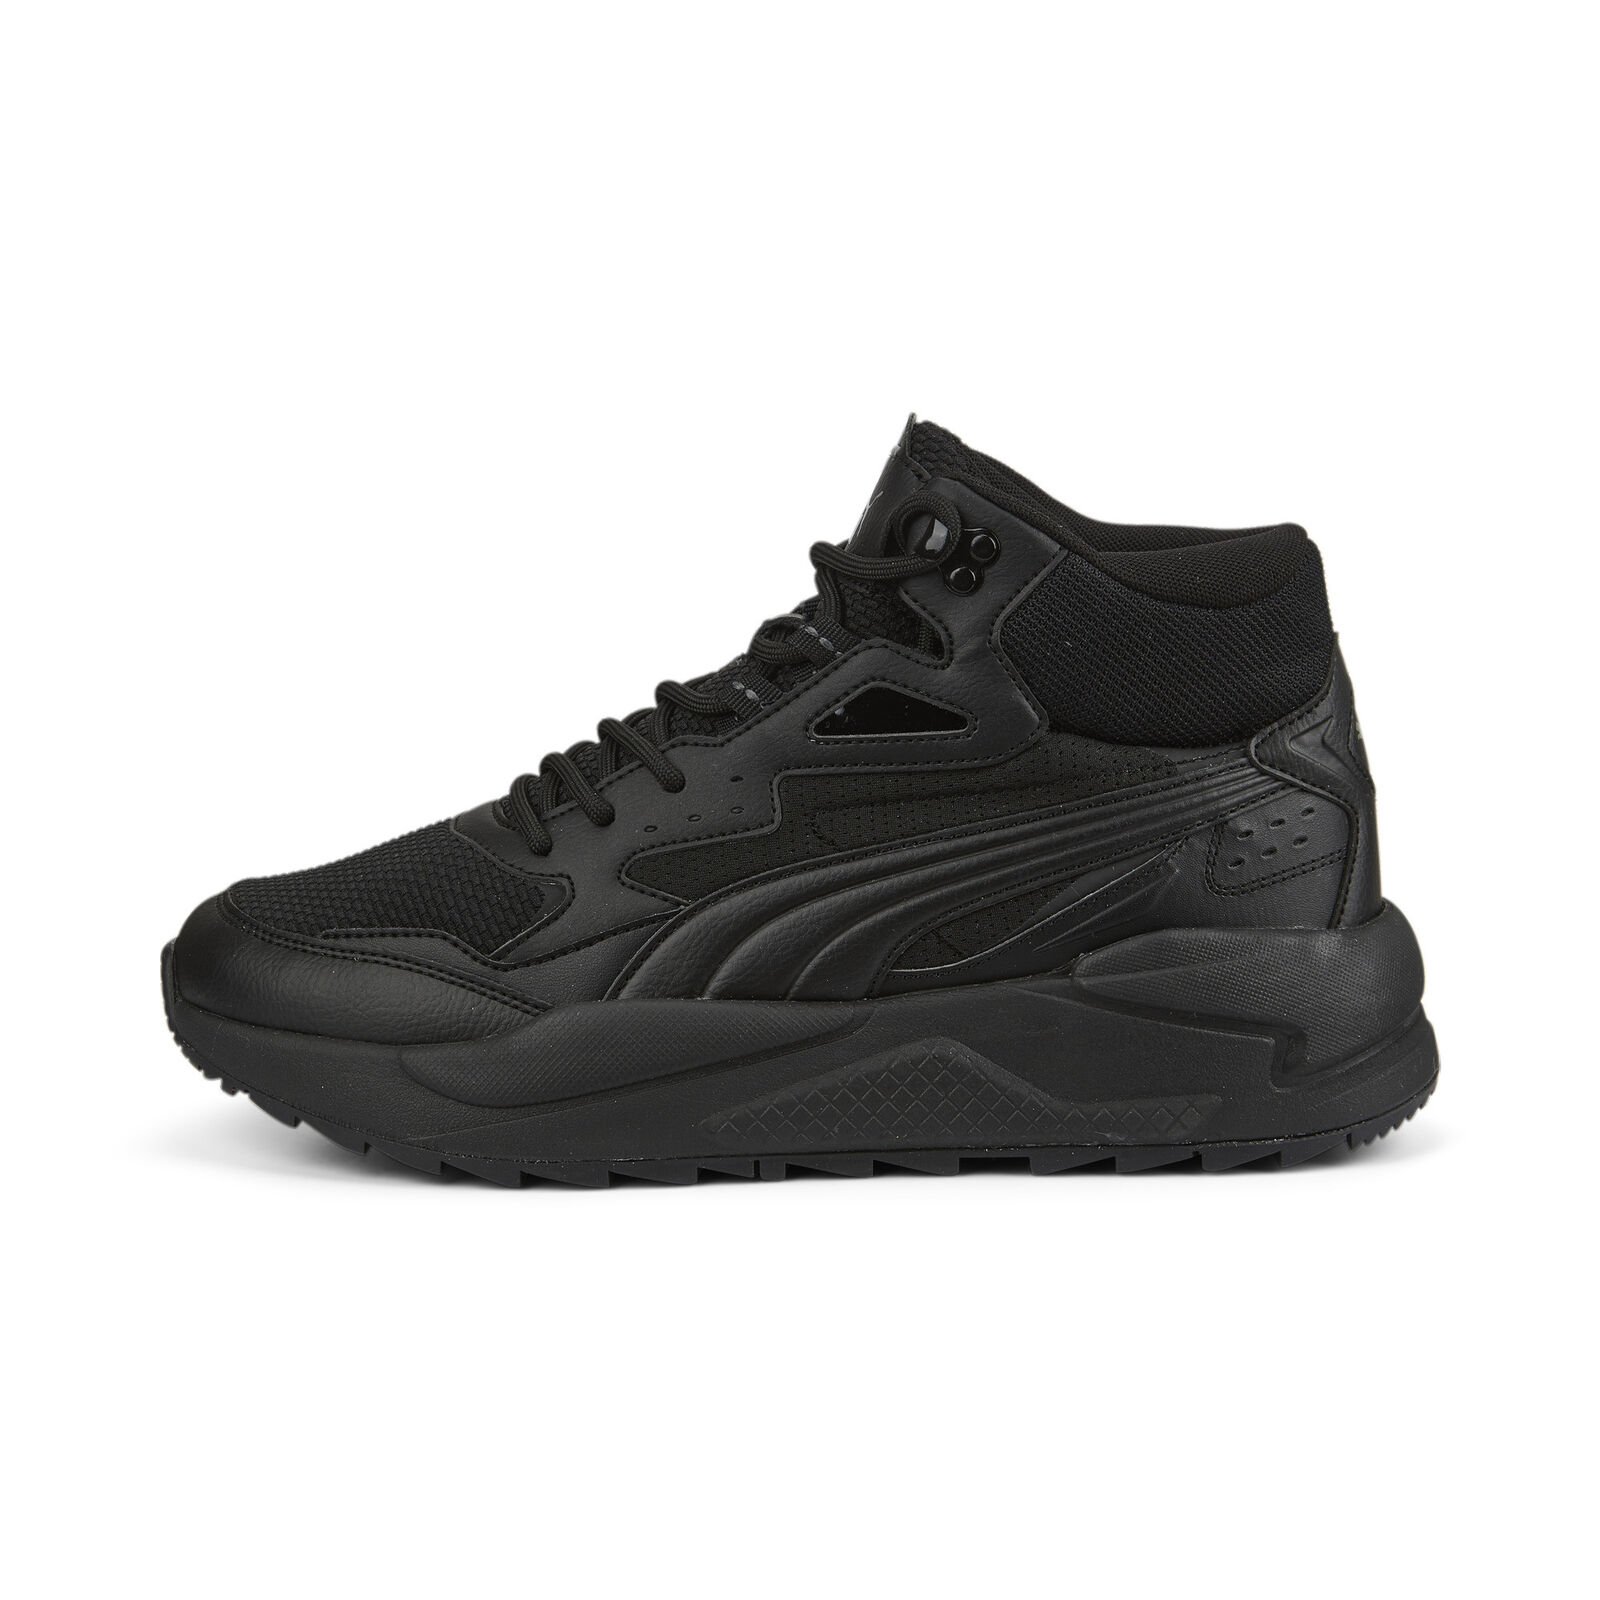 Puma Men's X-Ray Speed Mid Winterized Sneakers $36 + Free Shipping